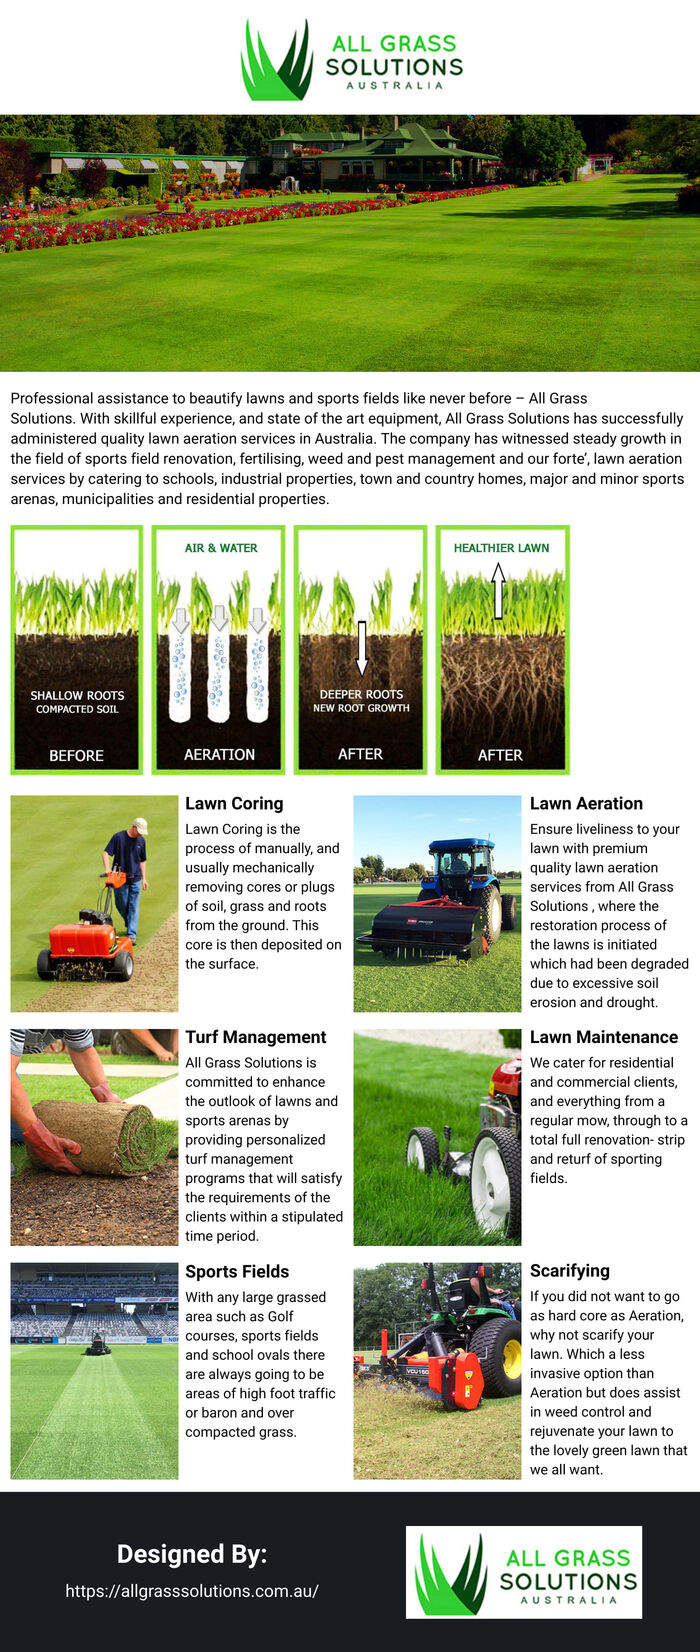 This Infographics is designed by All Grass Solutions